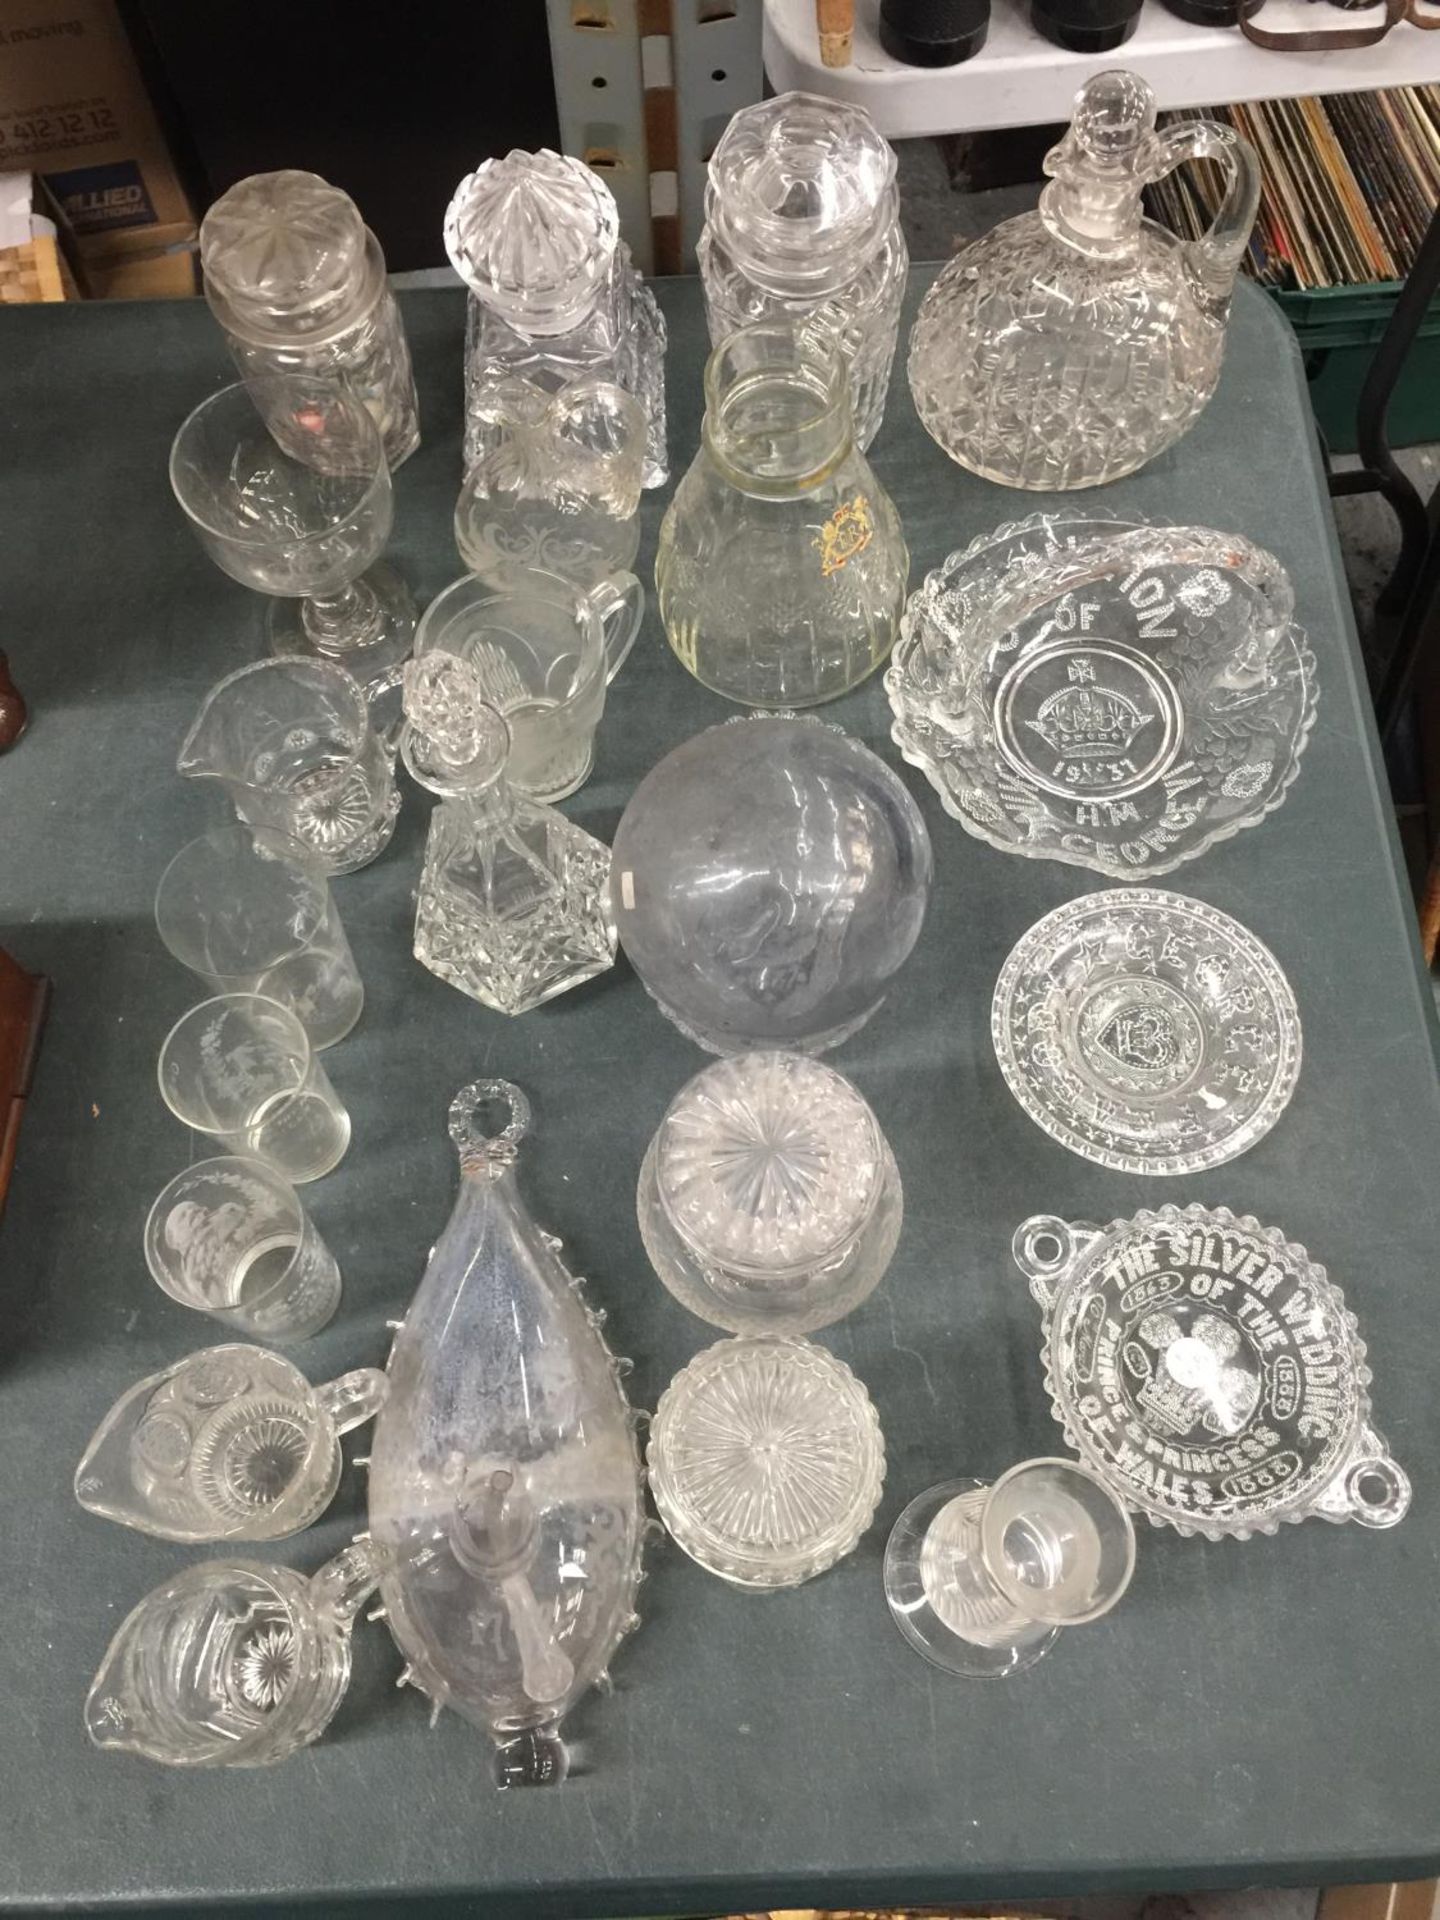 A QUANTITY OF GLASSWARE TO INCLUDE A 19TH CENTURY GLASS BAROMETER - A/F, JUGS, DISHES ETC